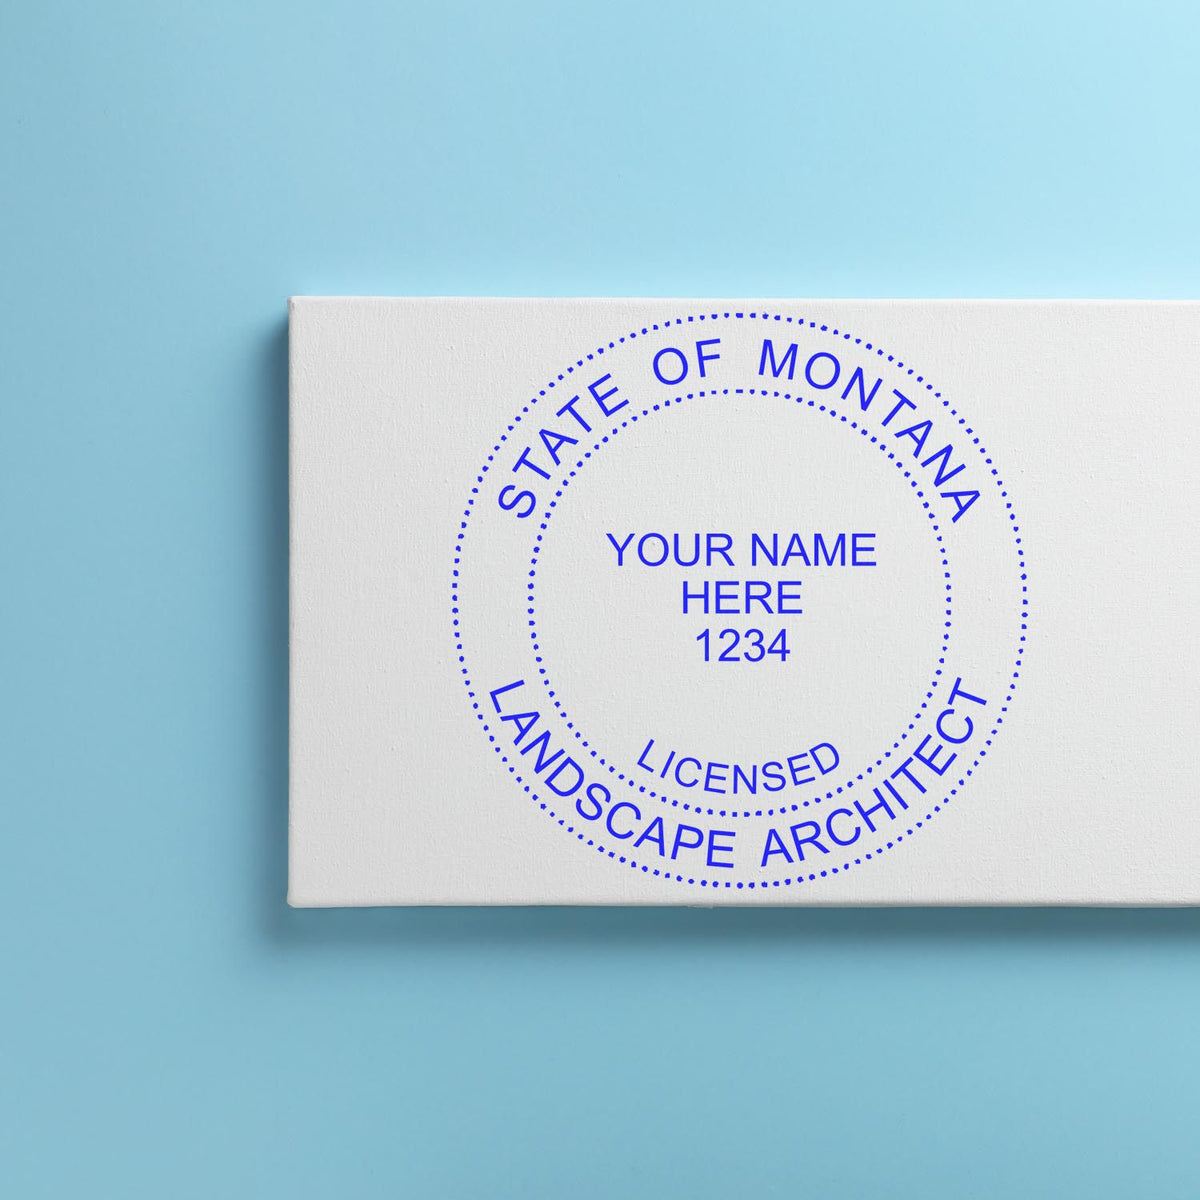 The Digital Montana Landscape Architect Stamp stamp impression comes to life with a crisp, detailed photo on paper - showcasing true professional quality.